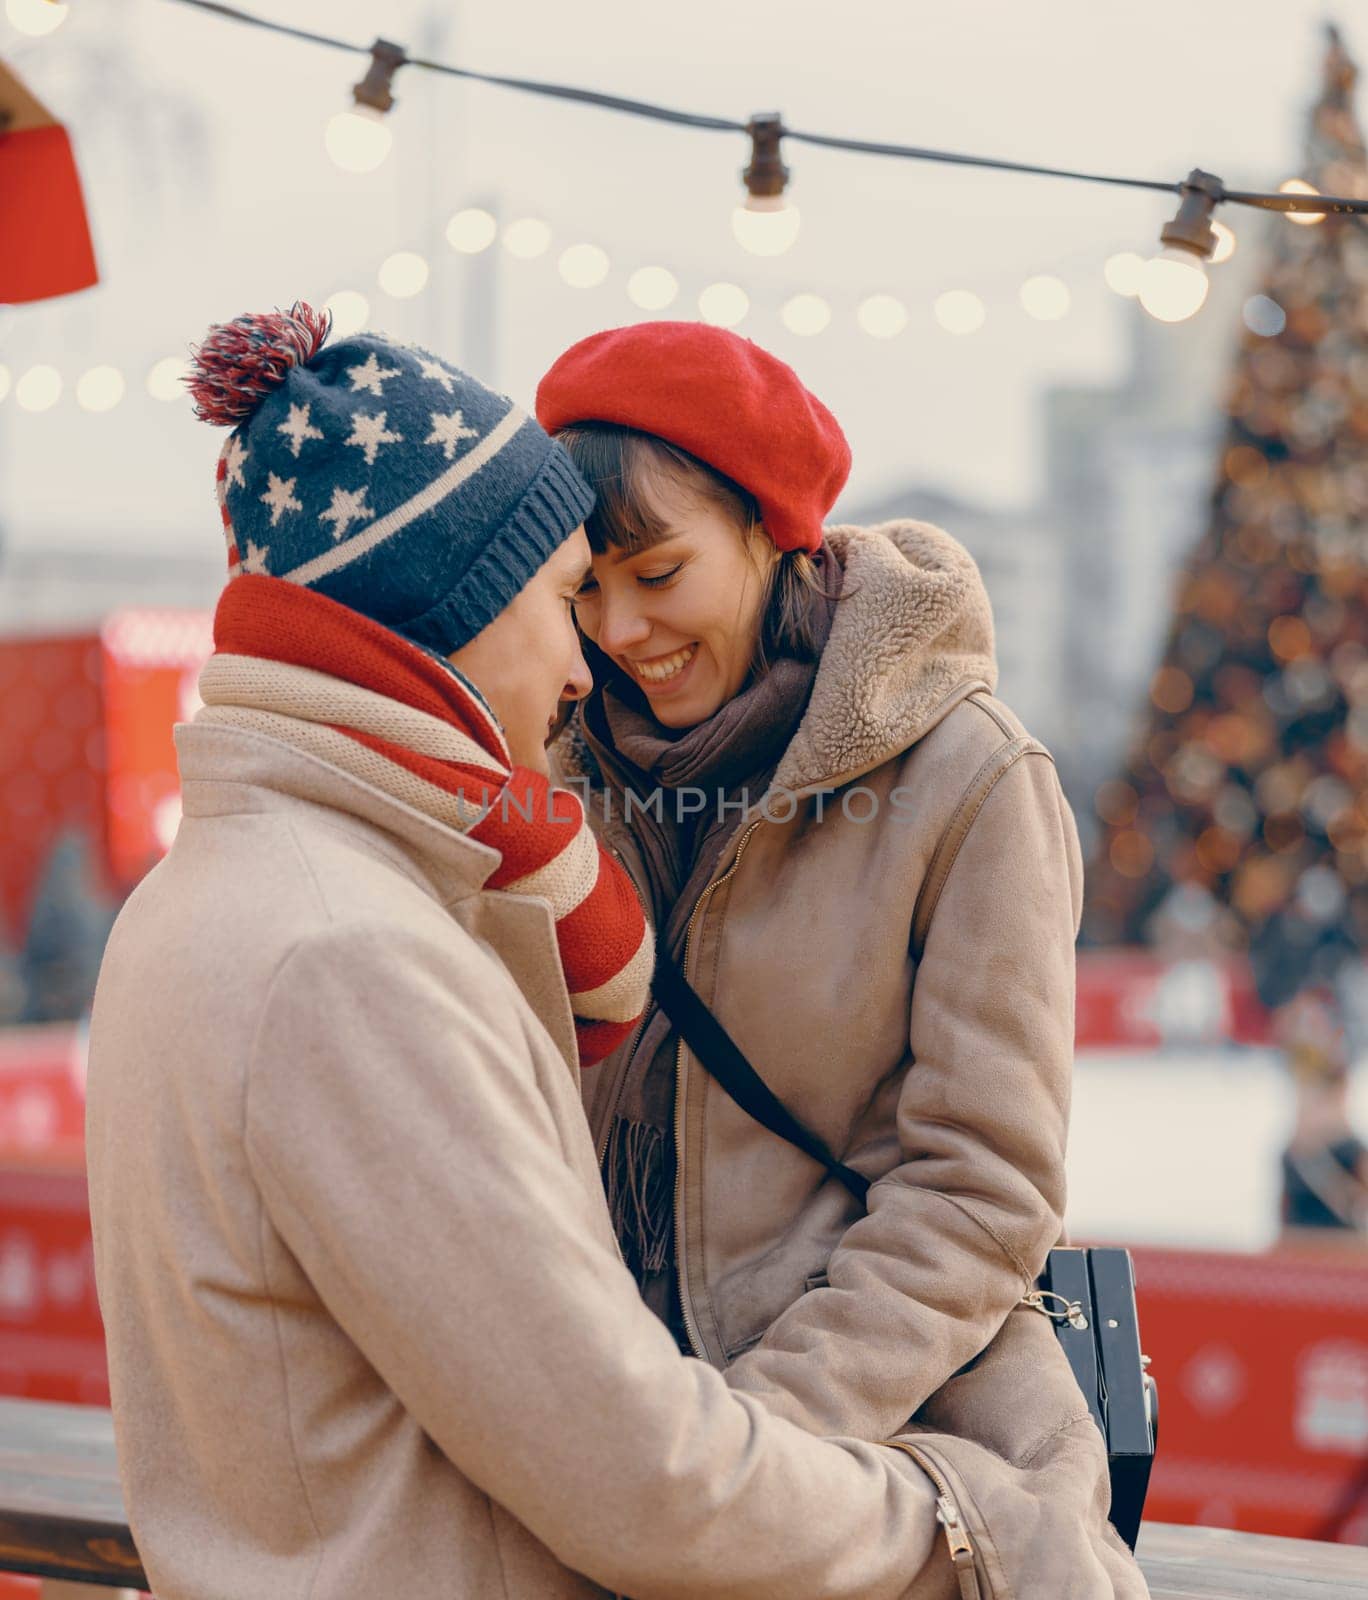 A romantic scene unfolds with a couple kissing gently amidst the twinkling lights of a holiday market, their winter attire adding warmth to the moment